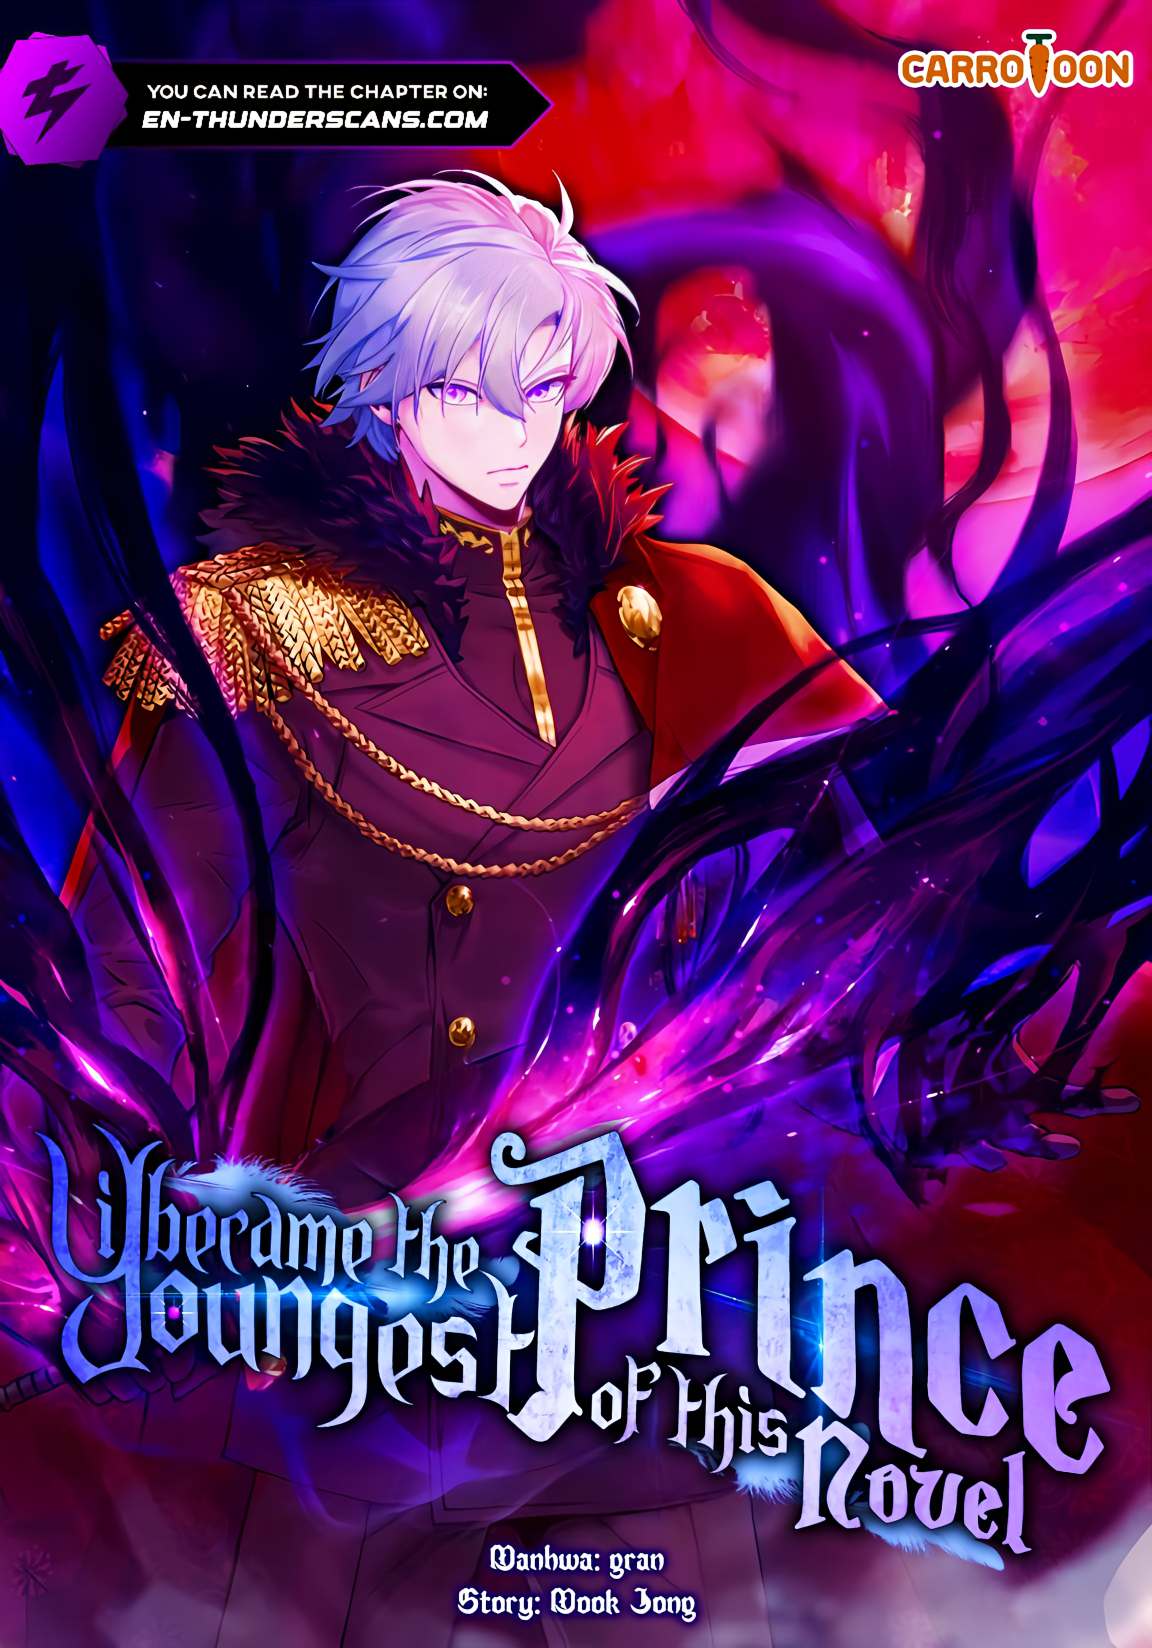 I Became the Youngest Prince of This Novel